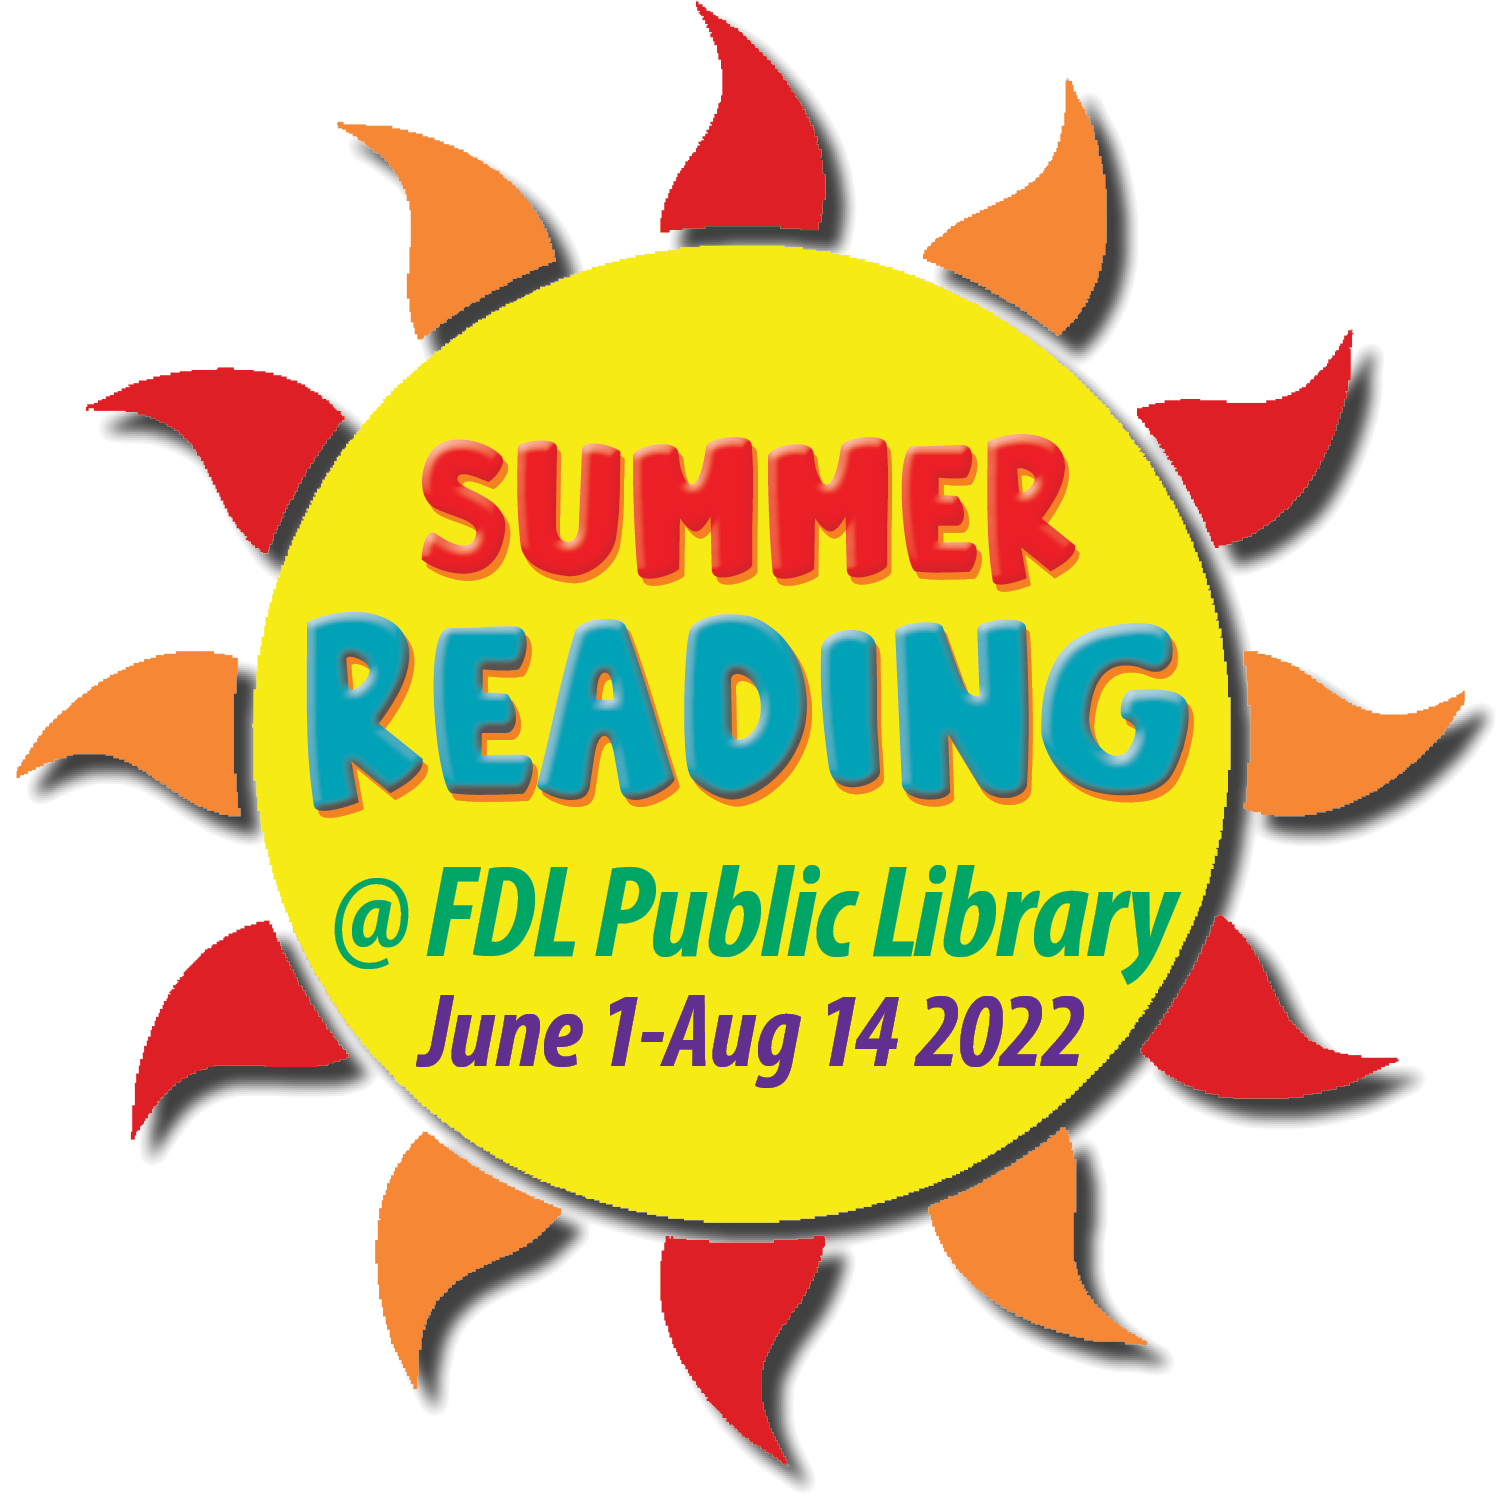 Learn to Read Beyond the Beaten Path as Summer Reading begins at FDLPL